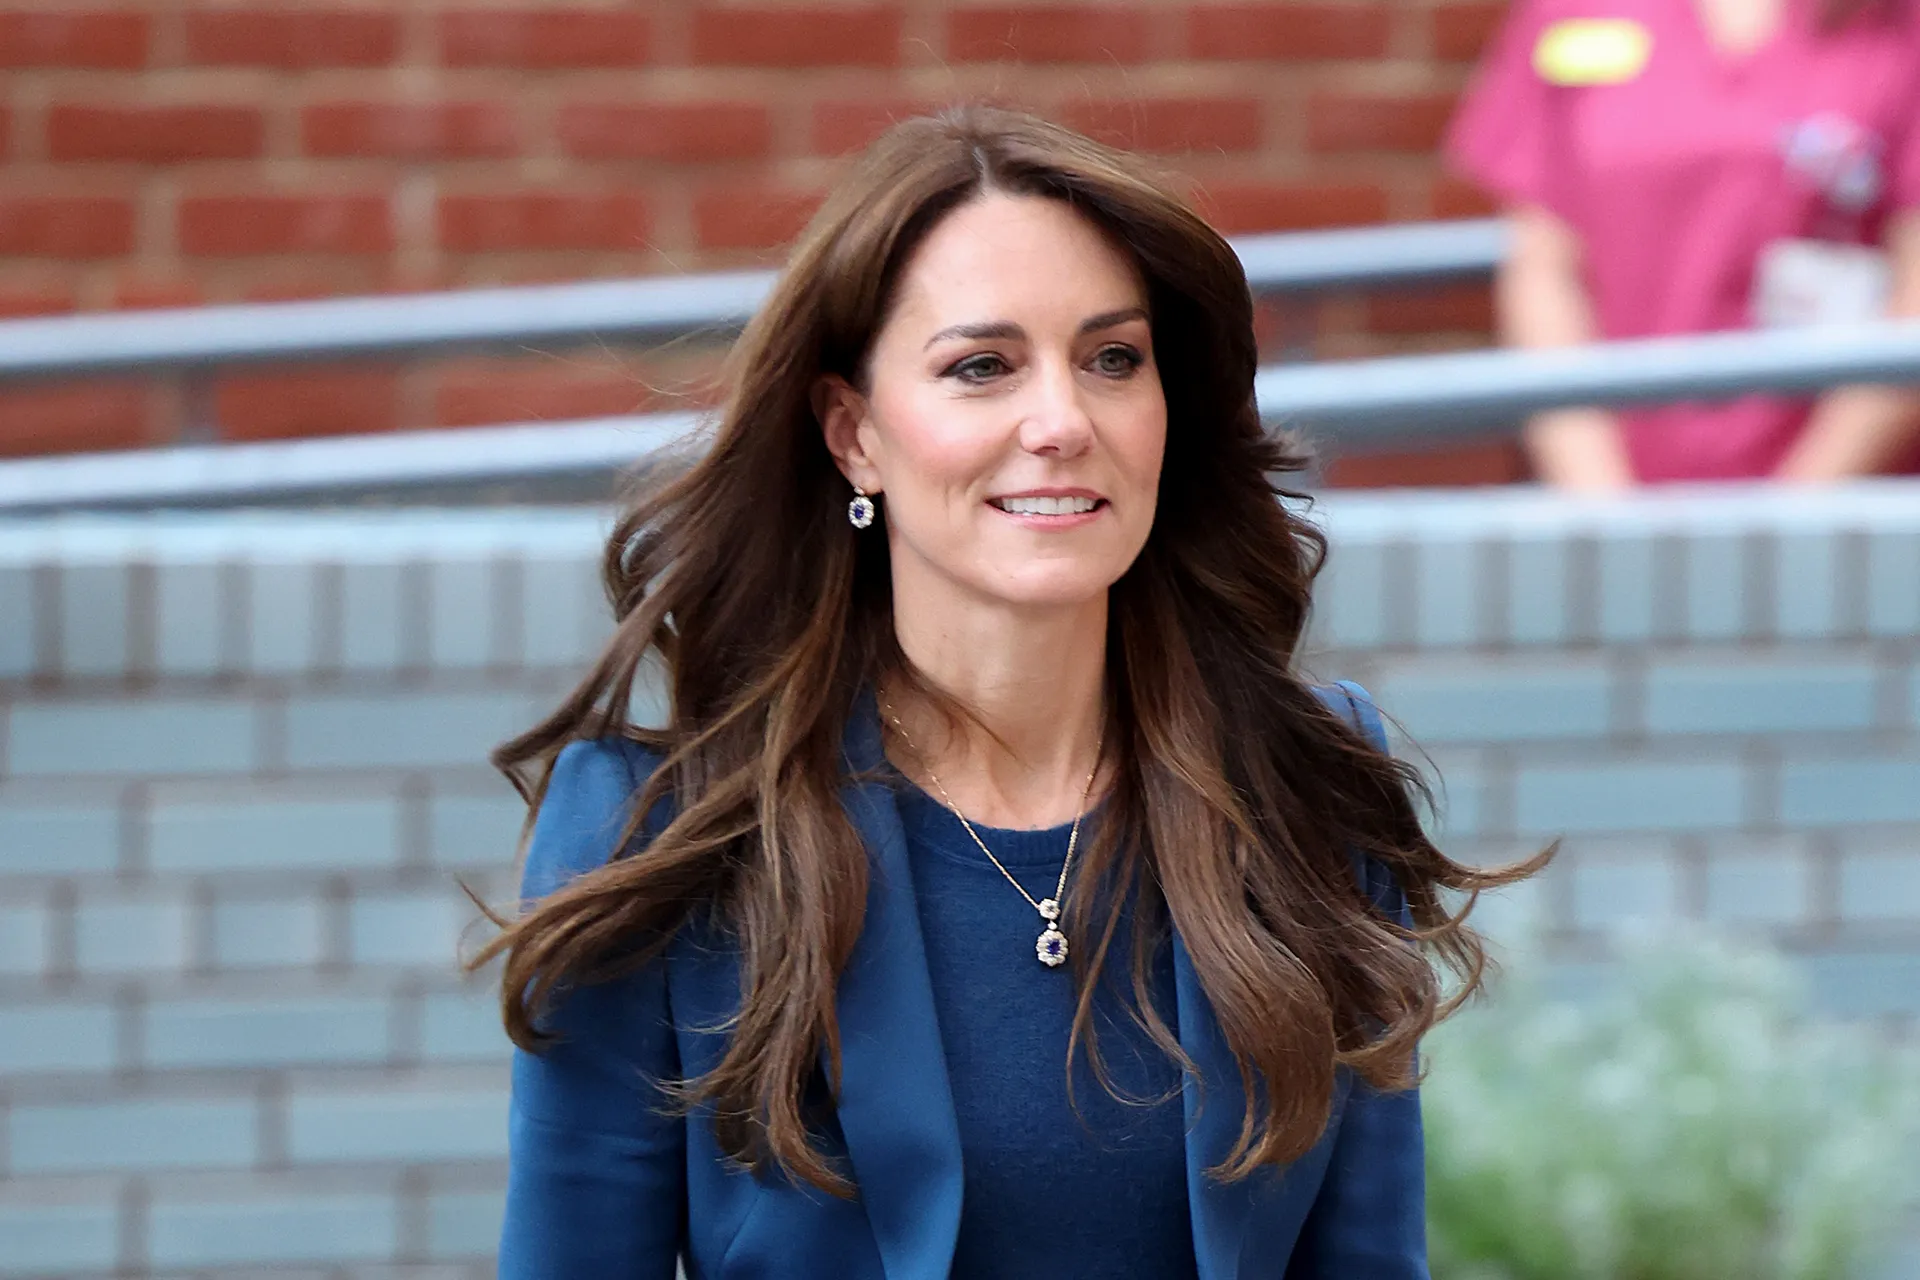 Princess Kate’s Courageous Battle: Inside Her Health Journey and the Royal Family’s Response